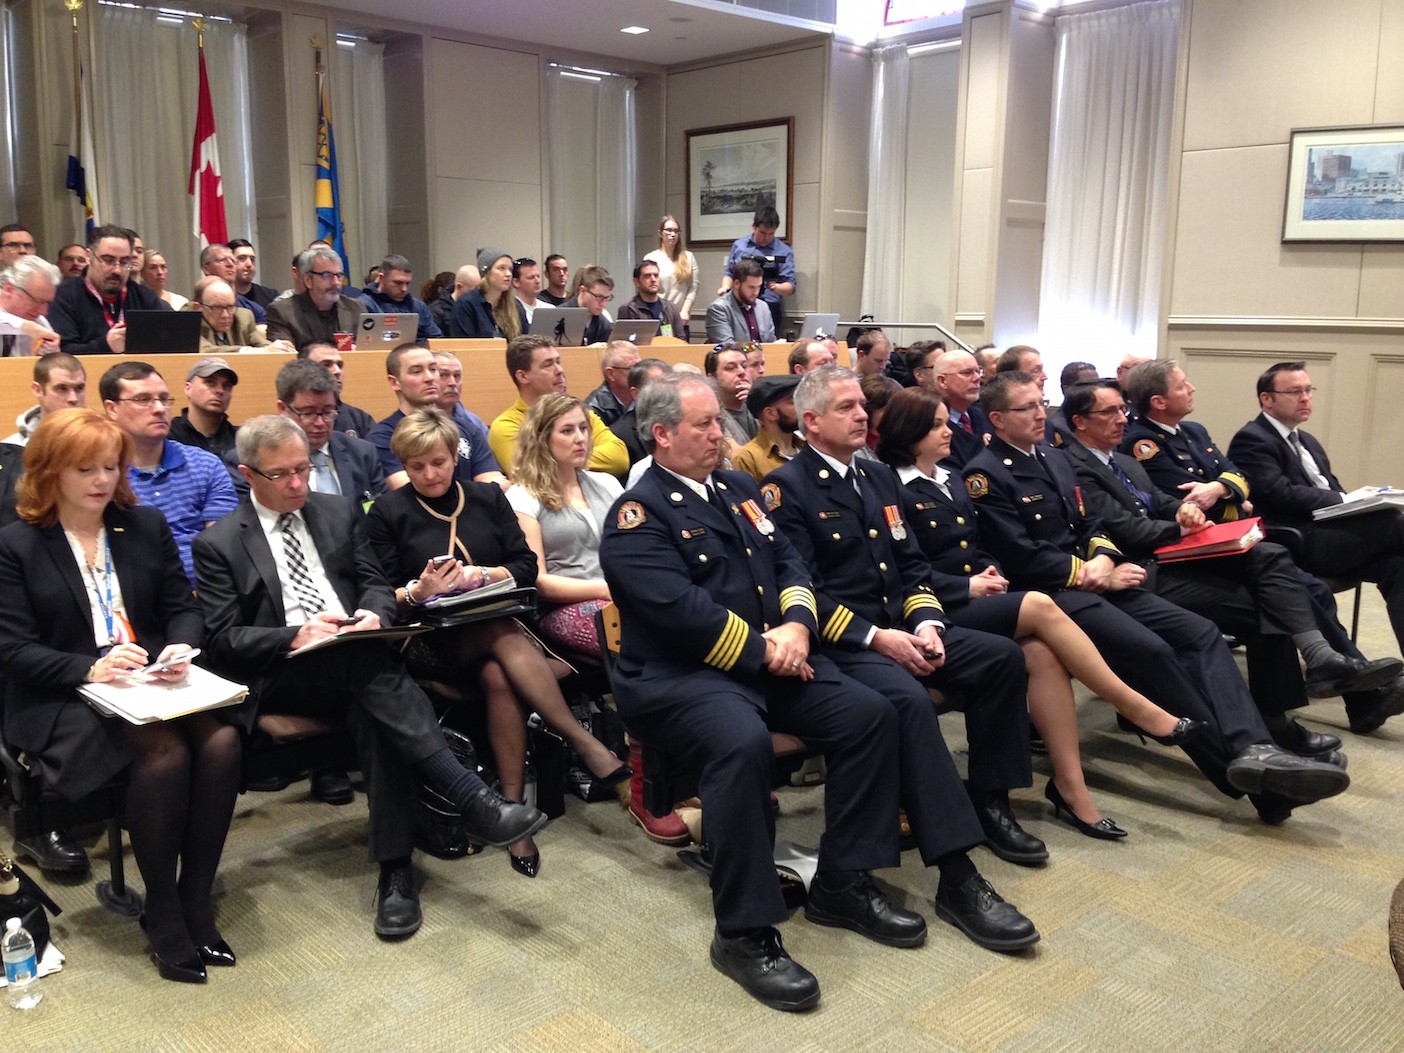 7 reasons fire chief Doug Trussler should leave Halifax